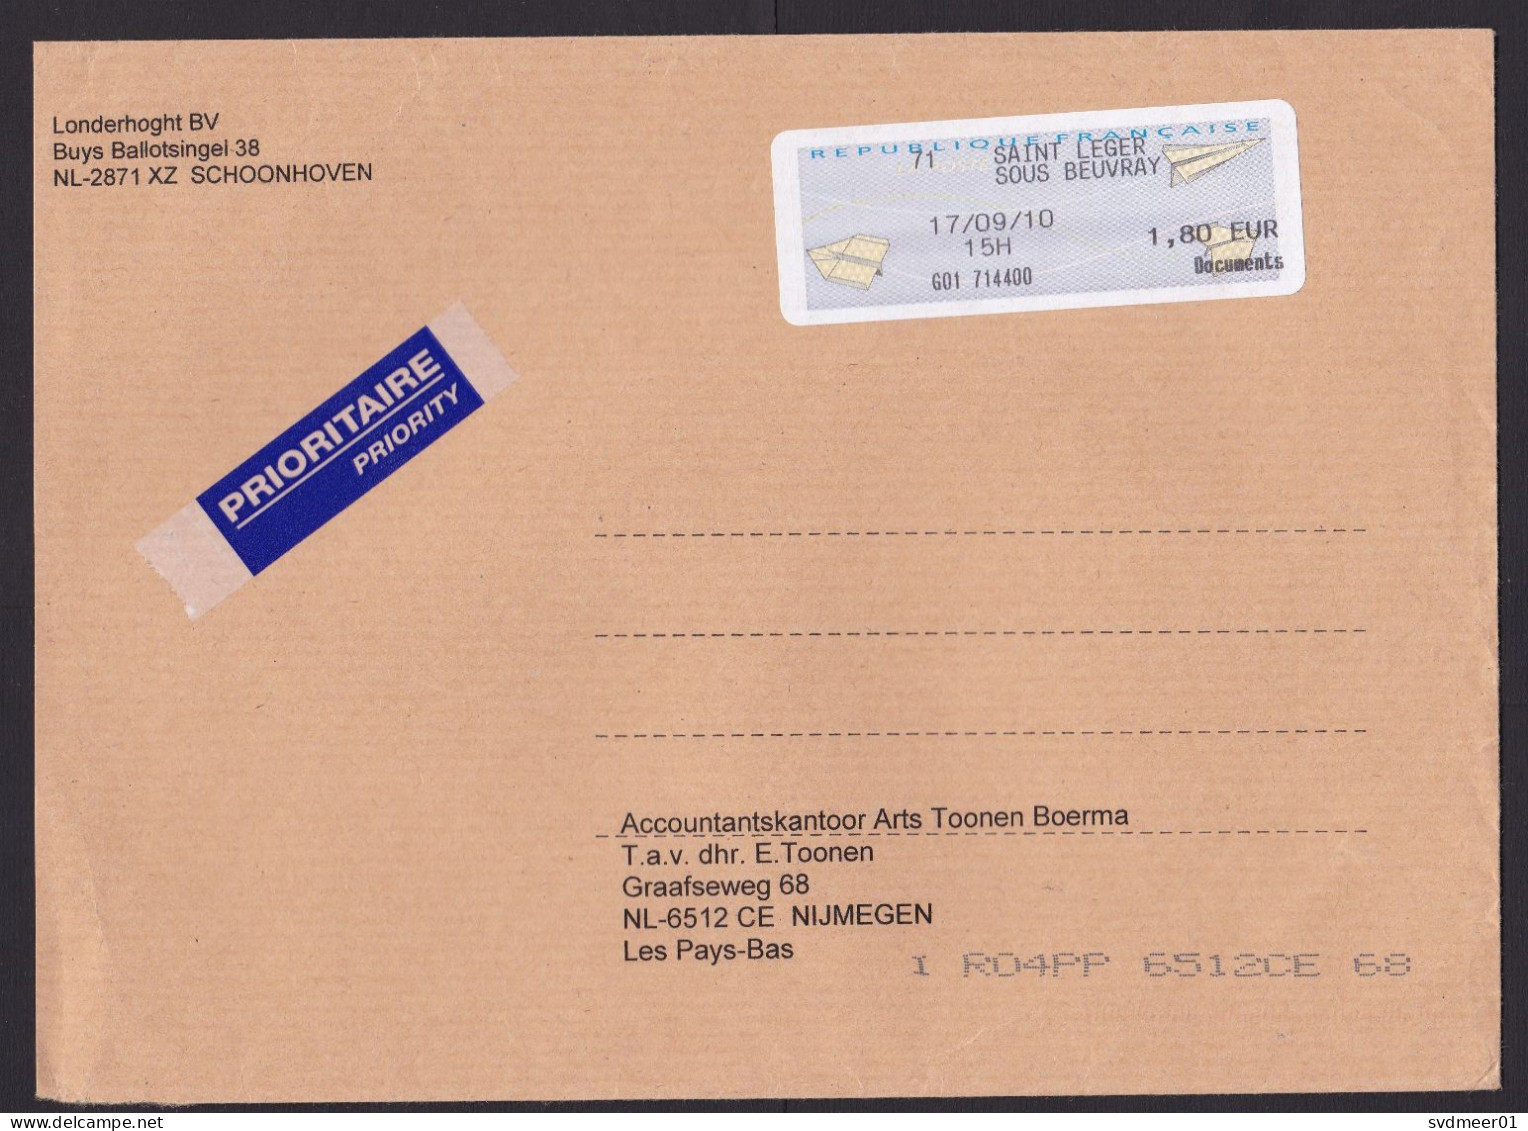 France: Priority Cover To Netherlands, 2010, ATM Machine Label, 1.80 Documents Rate, Saint Leger (traces Of Use) - Brieven En Documenten